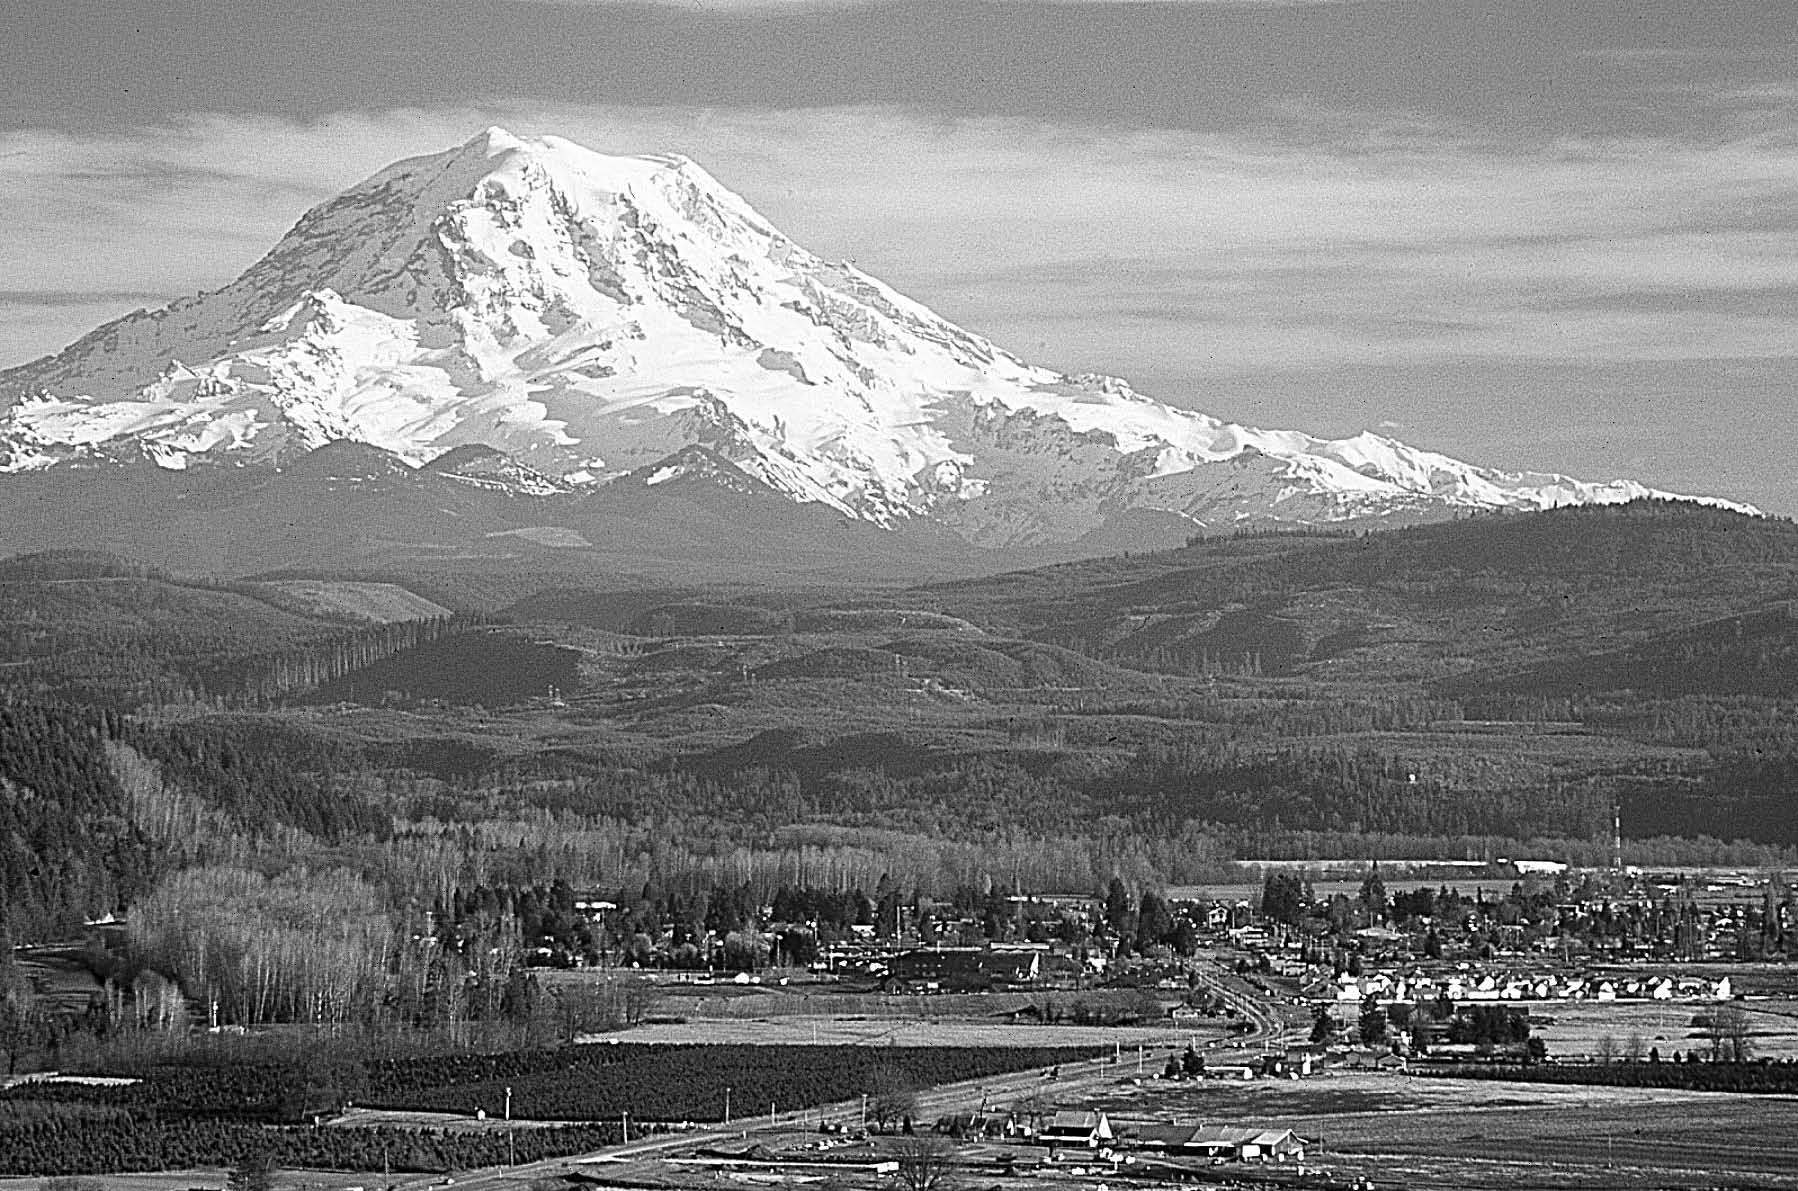 [View of Mount Rainier from across Puyallup River valley near Orting, Washington. (USGS photograph taken by Dave Wieprecht, U.S. Geological Survey.)]